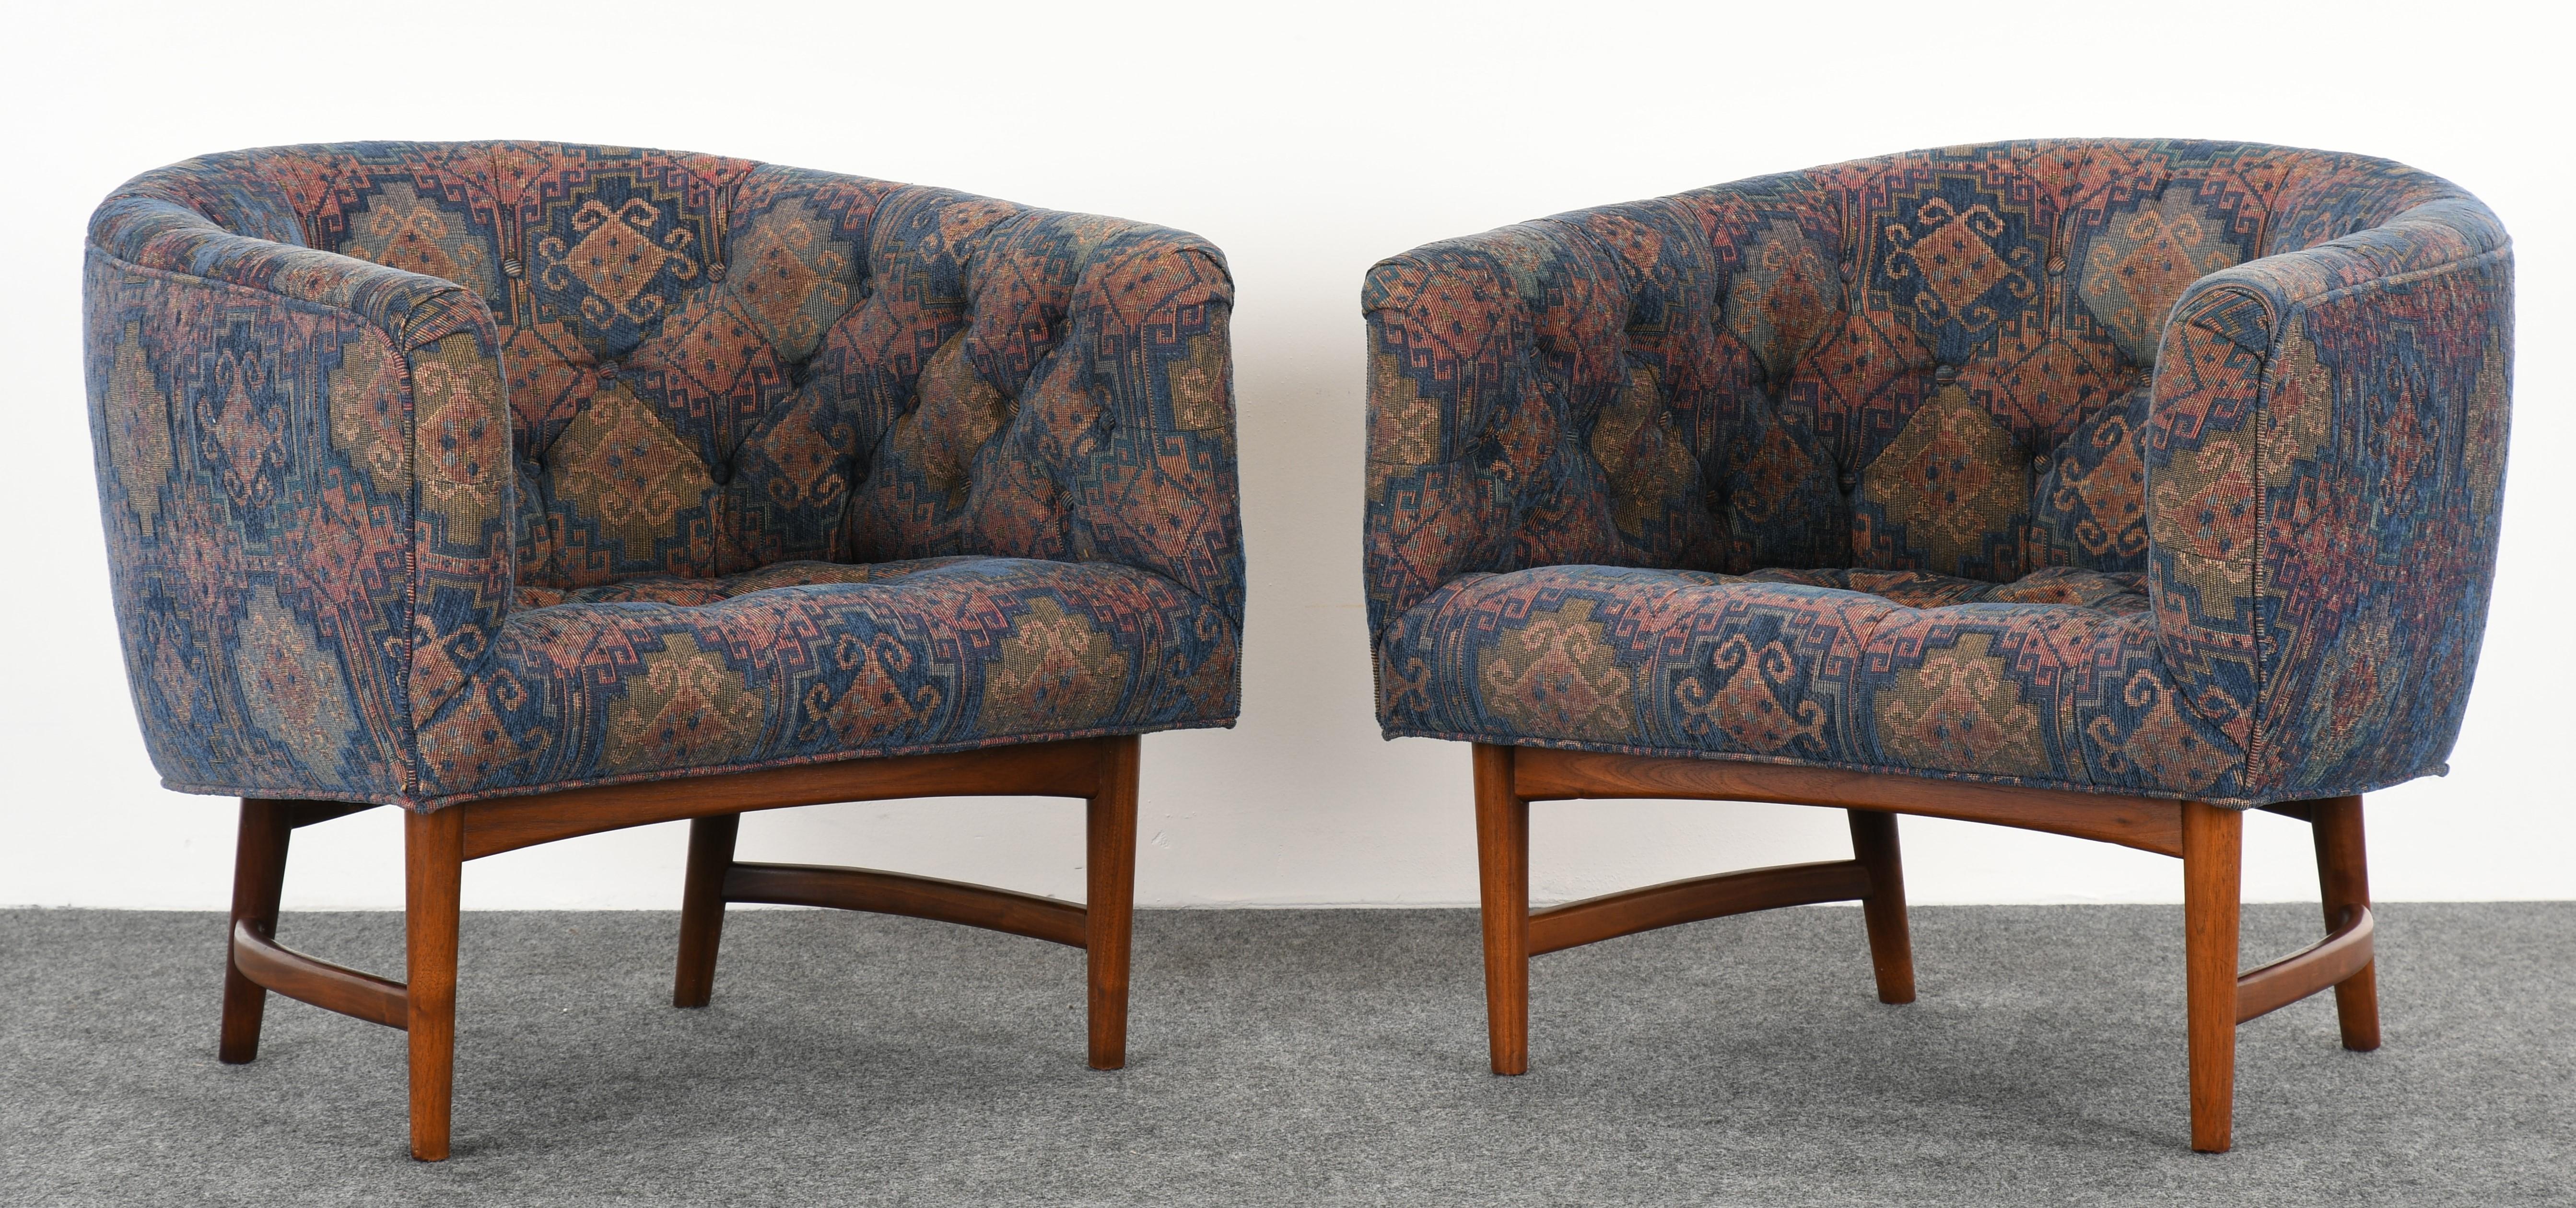 Pair of Milo Baughman barrel back lounge chairs, 1960s. Chairs sit on a sculptural walnut stretcher base. Very comfortable chairs in vintage fabric that is in good condition. New fabric suggested. There is a single chair available that matches this